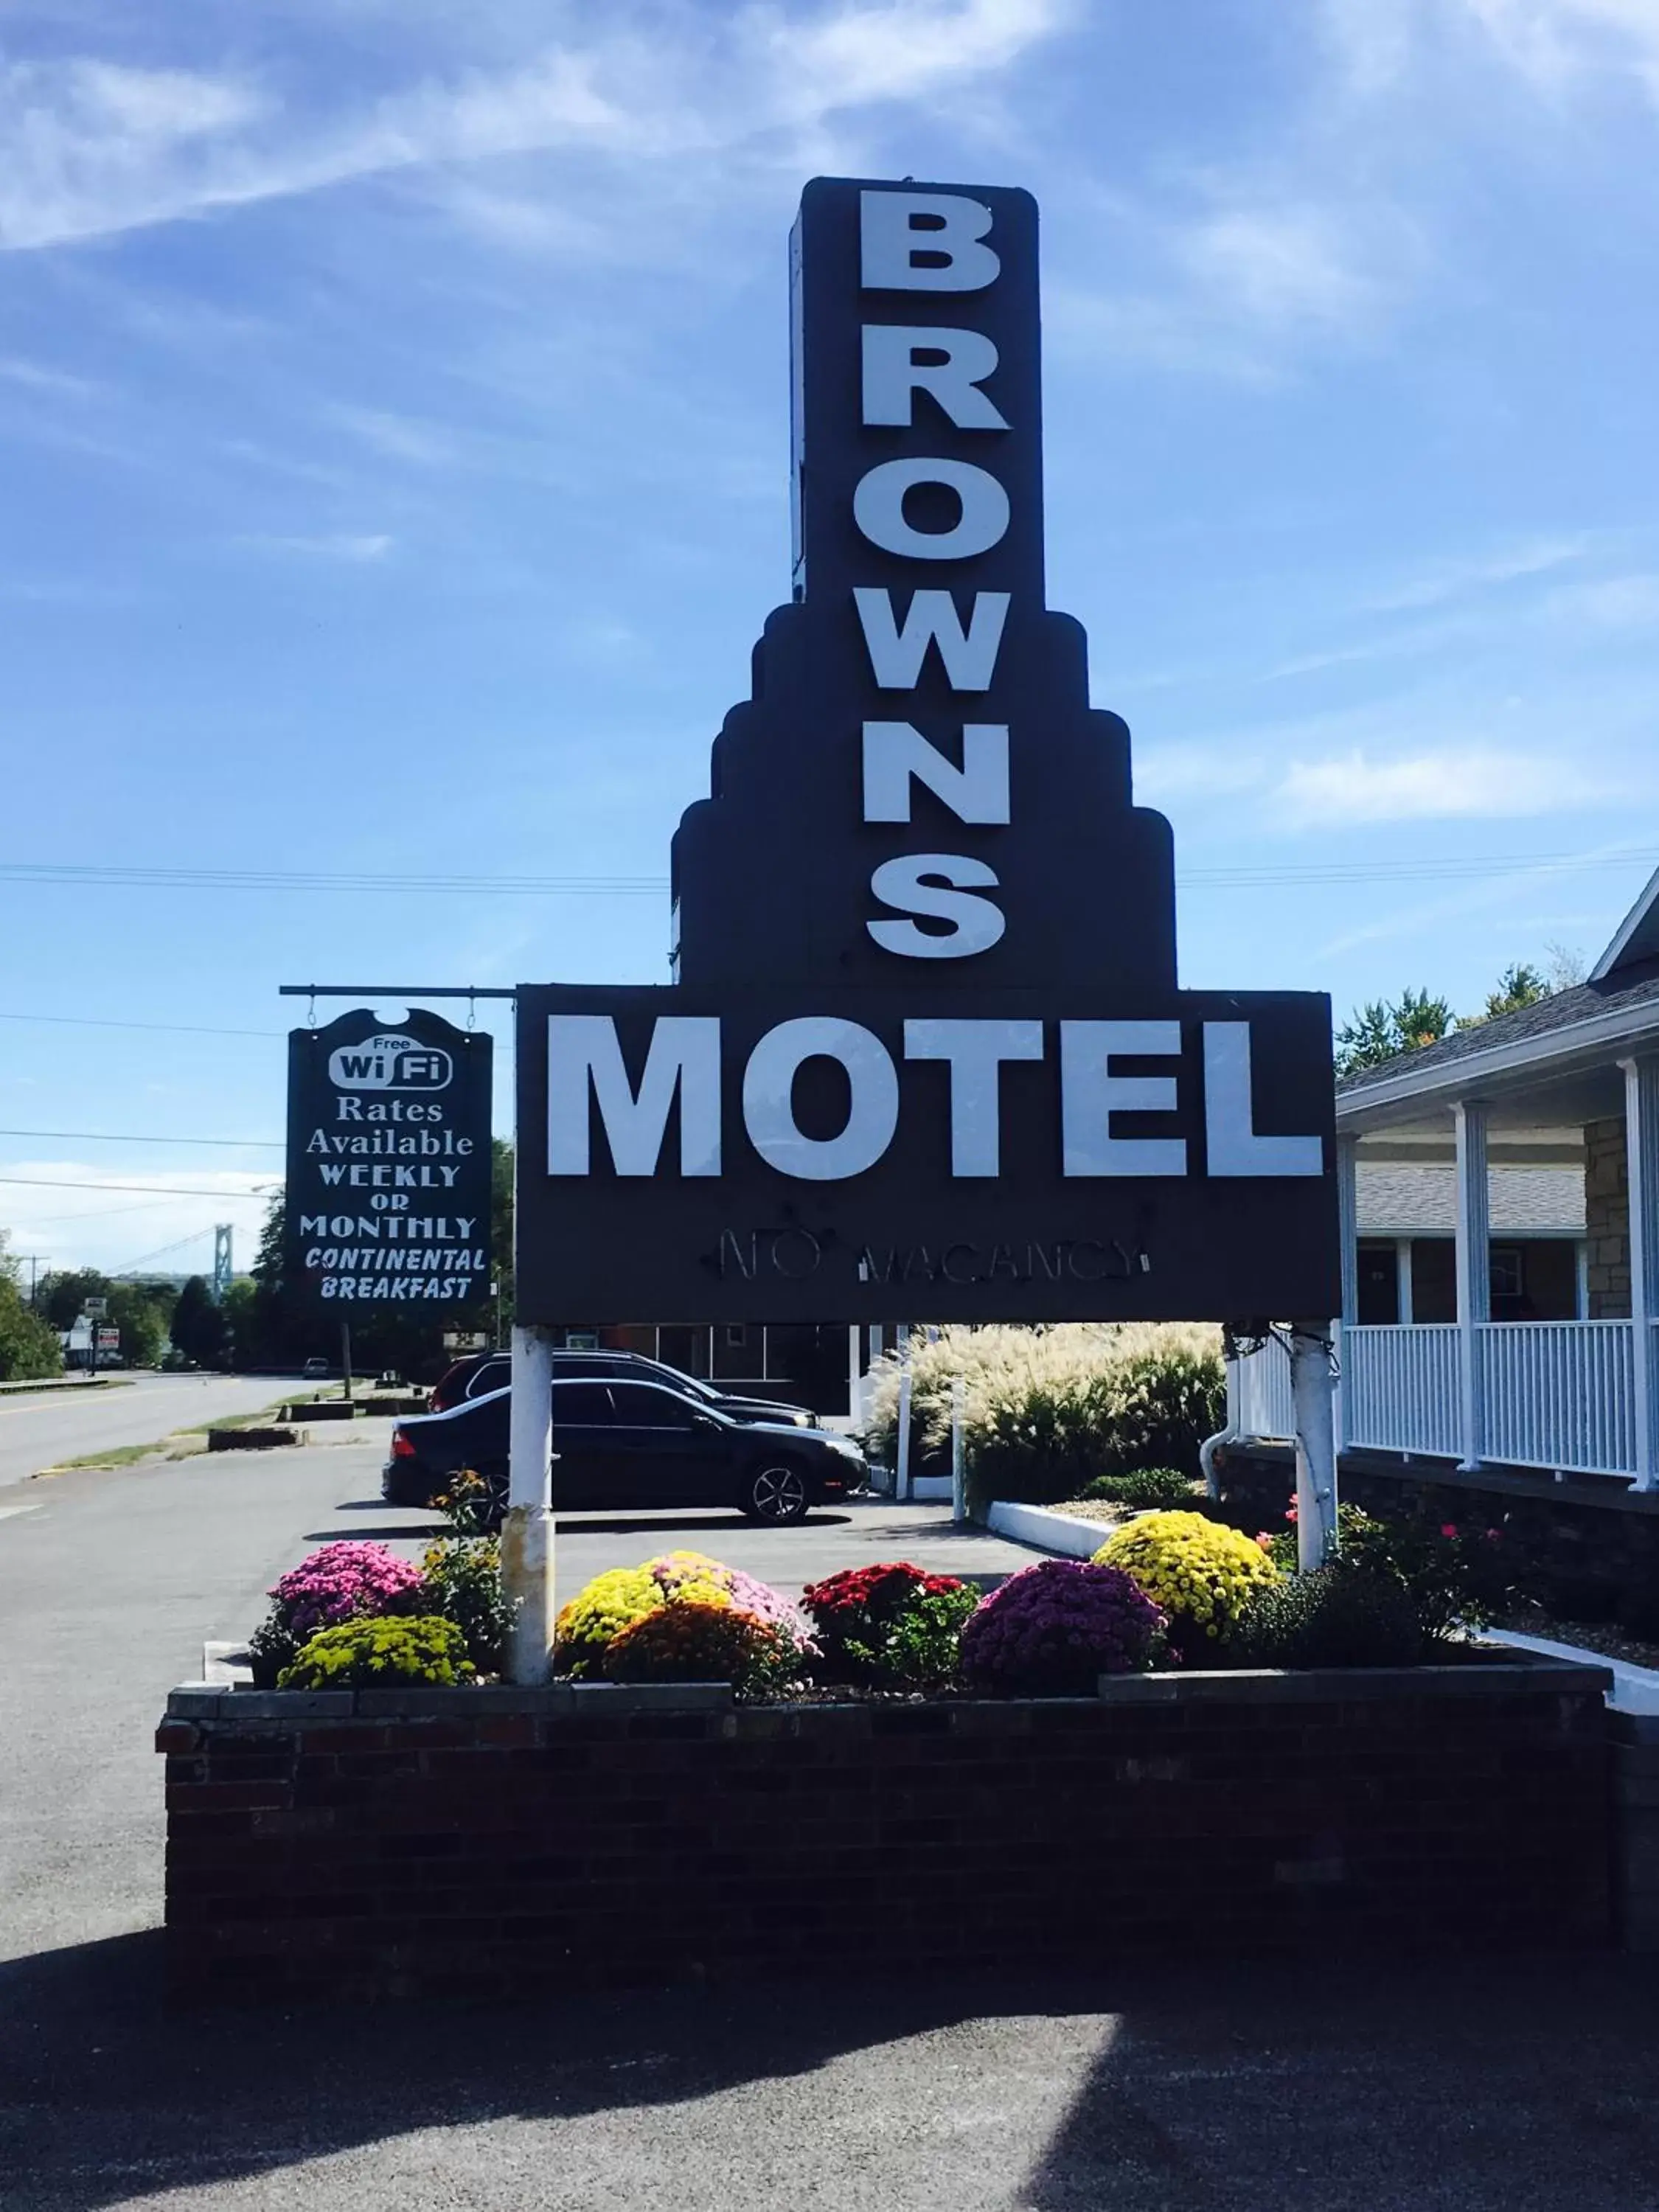 Property Building in Brown's Motel